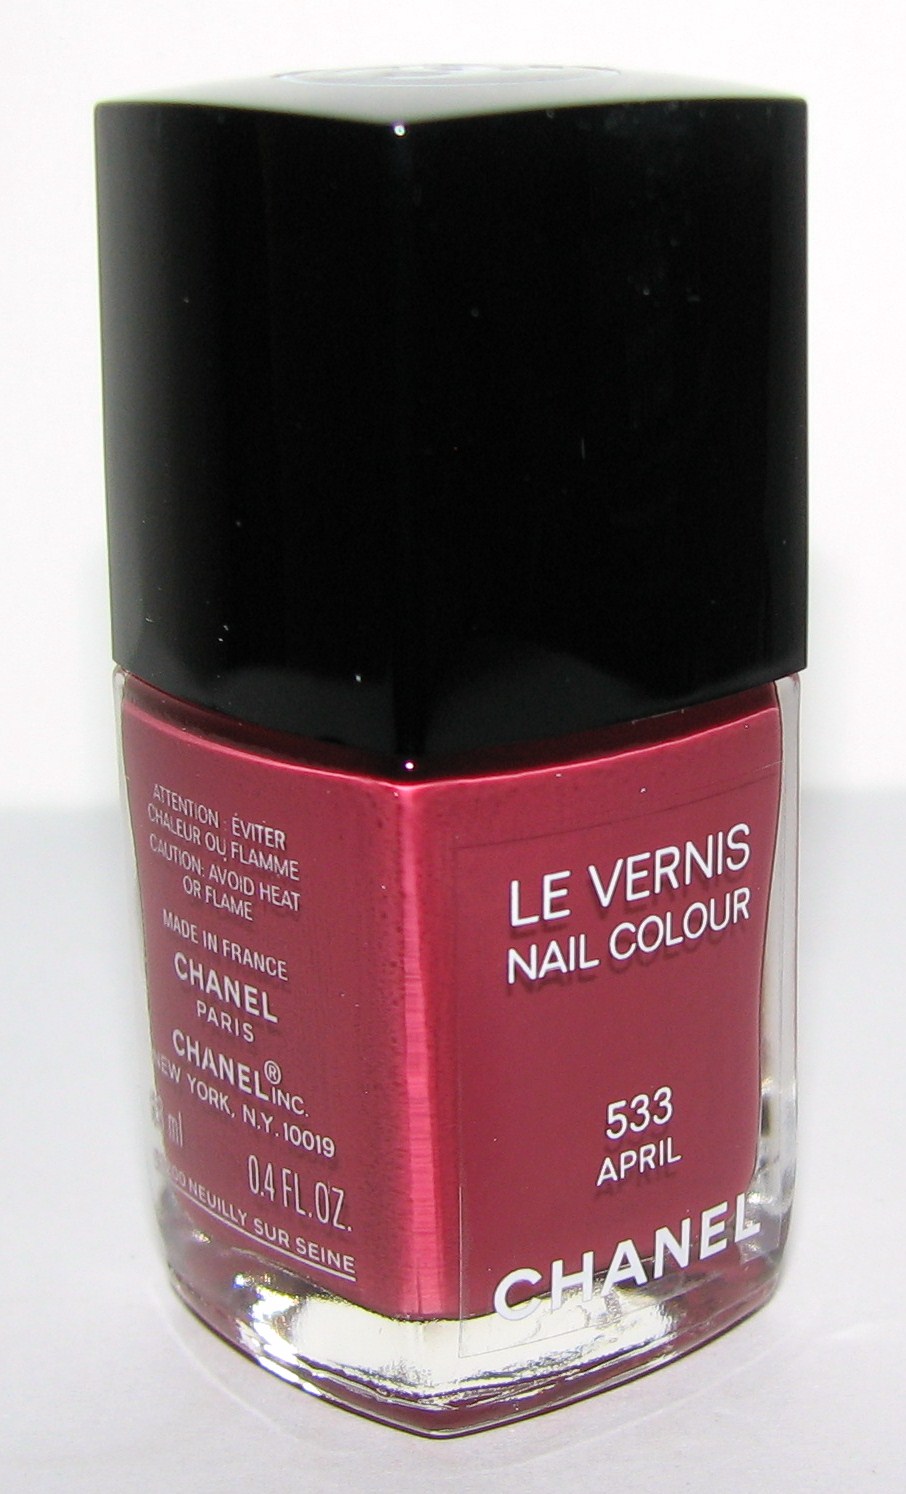 Chanel APRIL 533 Le Vernis Nail Colour Swatches and Review - Spring 2012 -  Blushing Noir